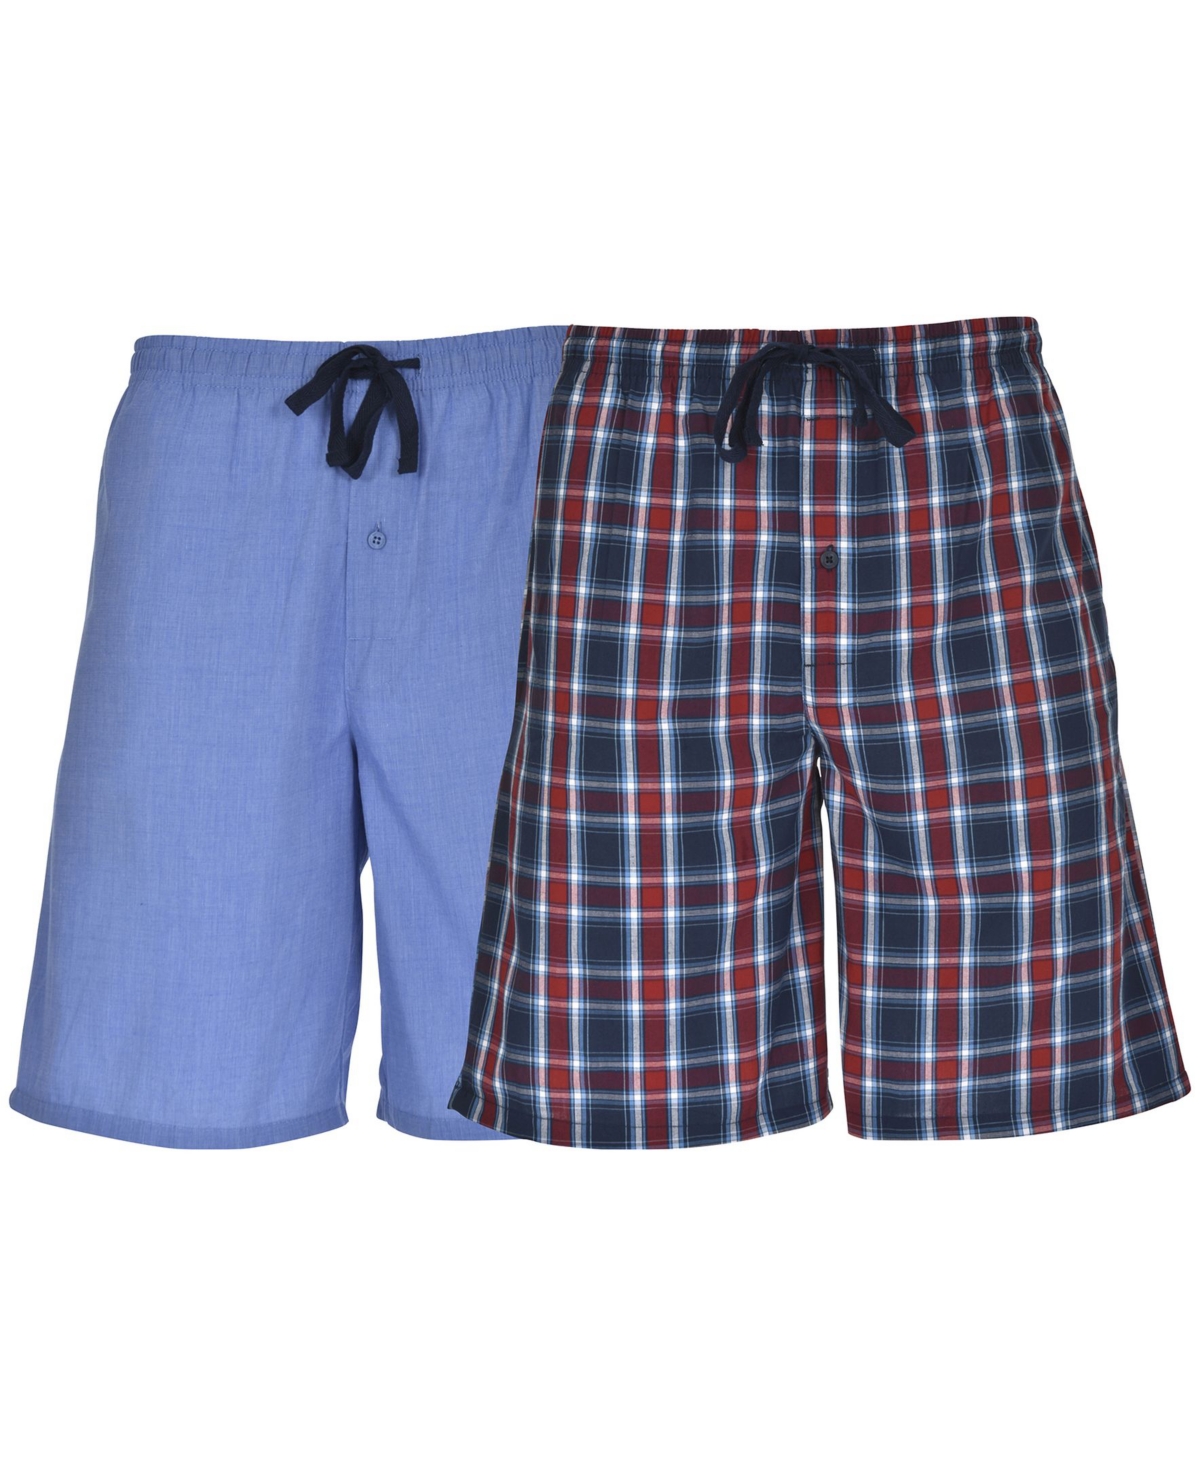 Hanes Men's Woven Jam, 2 Pack - Solid Blue/Red Plaid